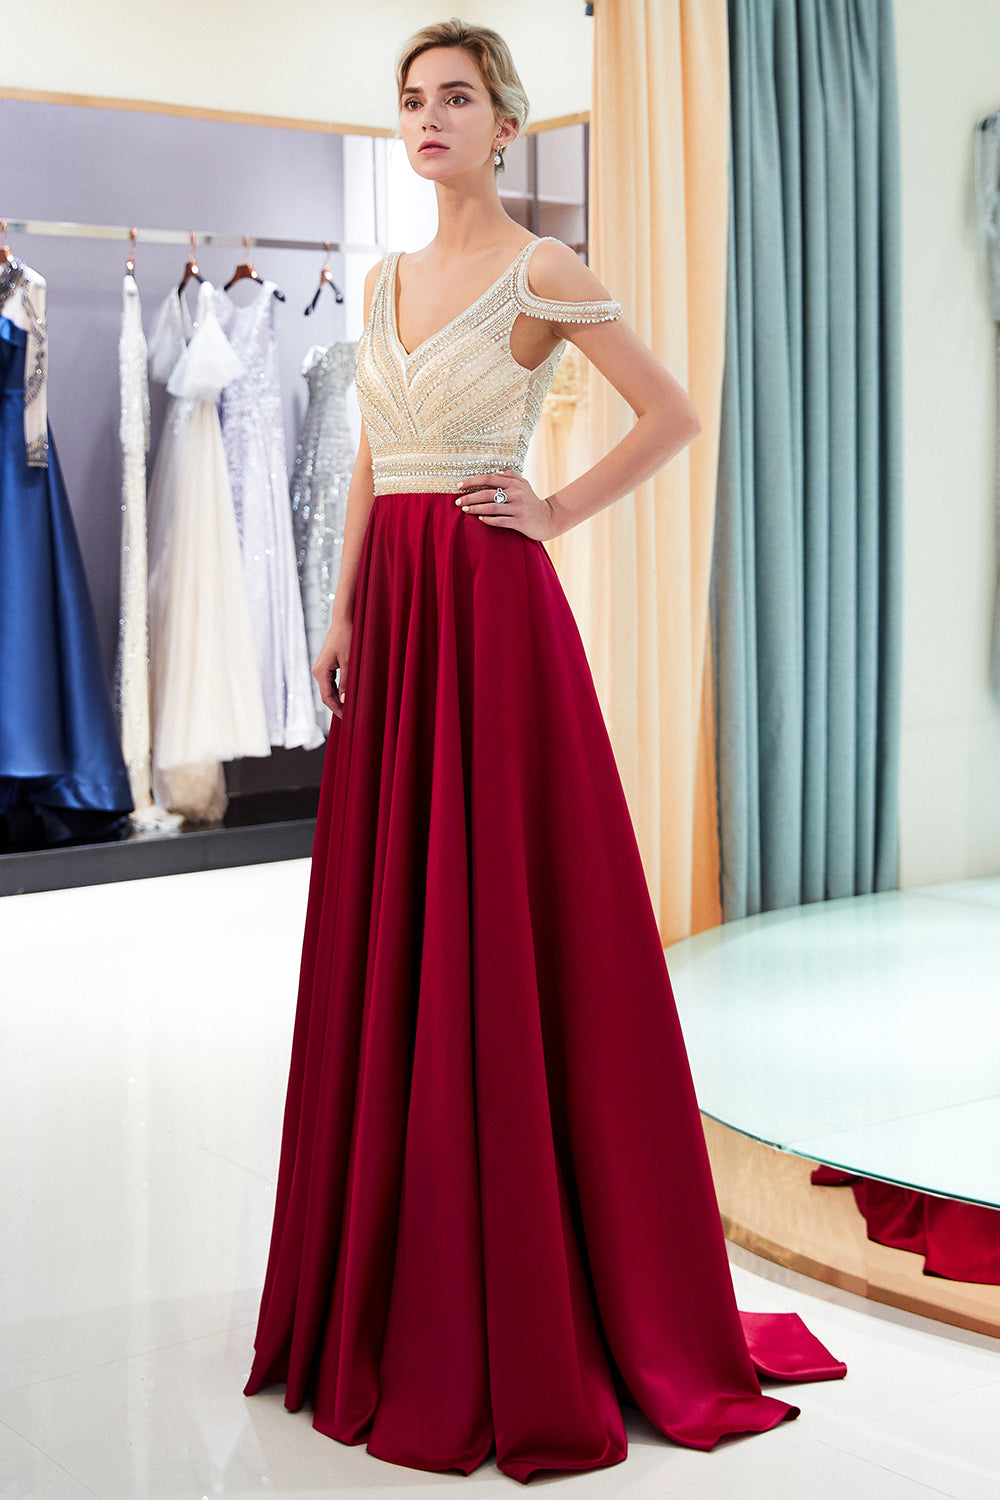 V-Neck Sleeveless Red Evening Dresses | Sexy Crystal Open Back Prom Dress